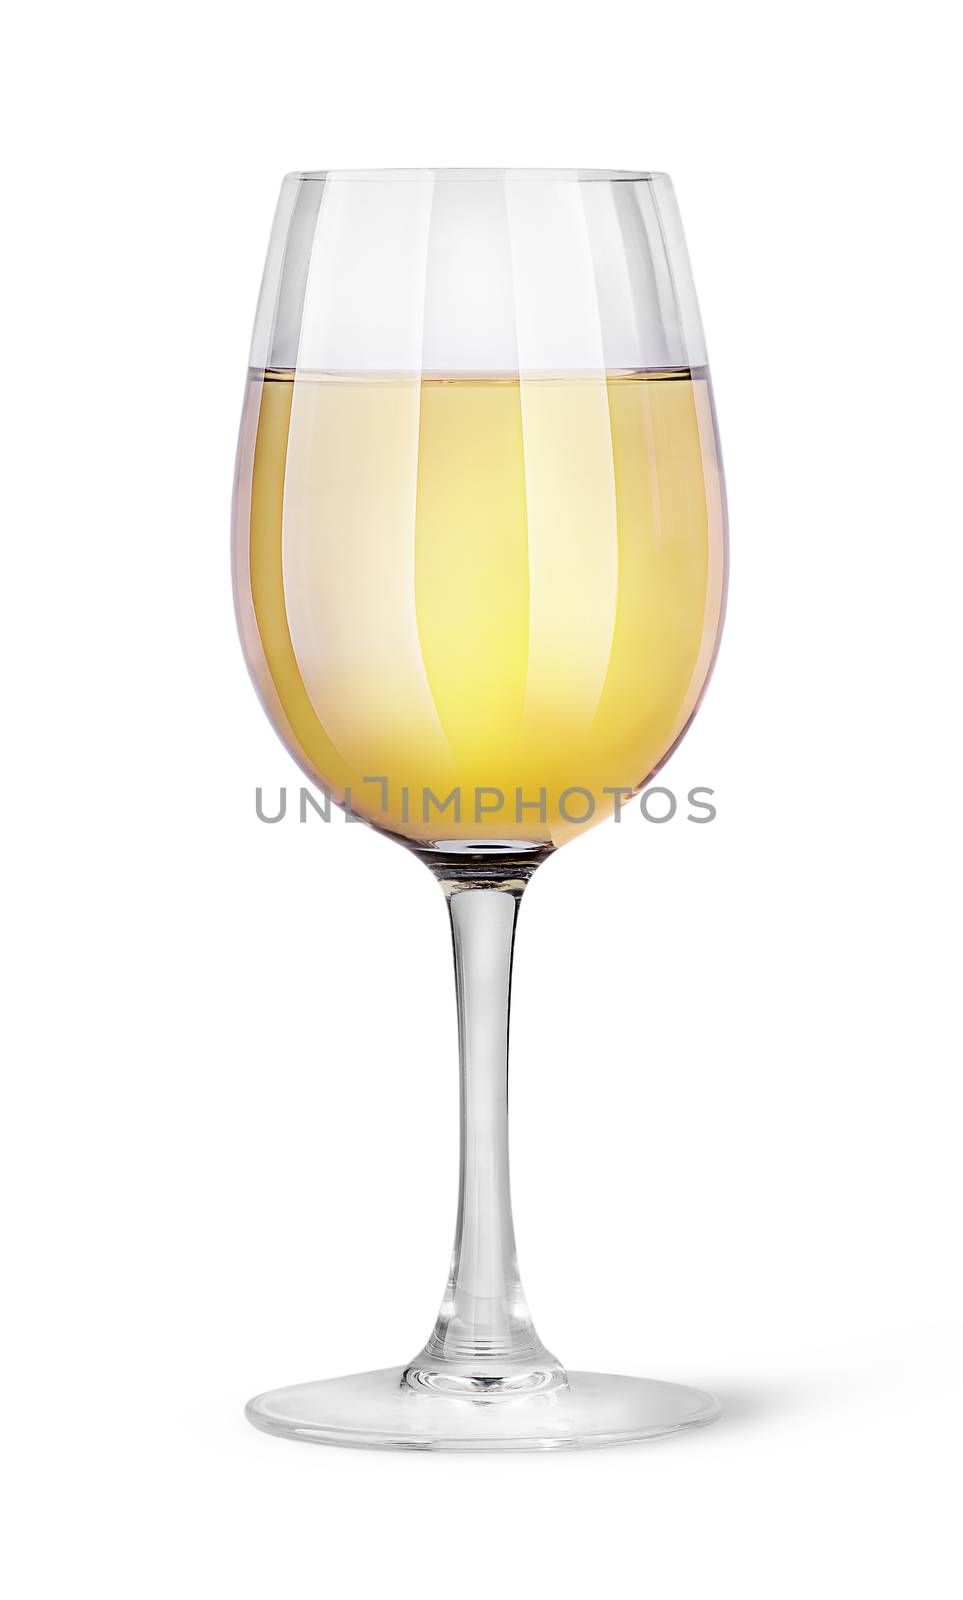 Glass of white wine by Cipariss